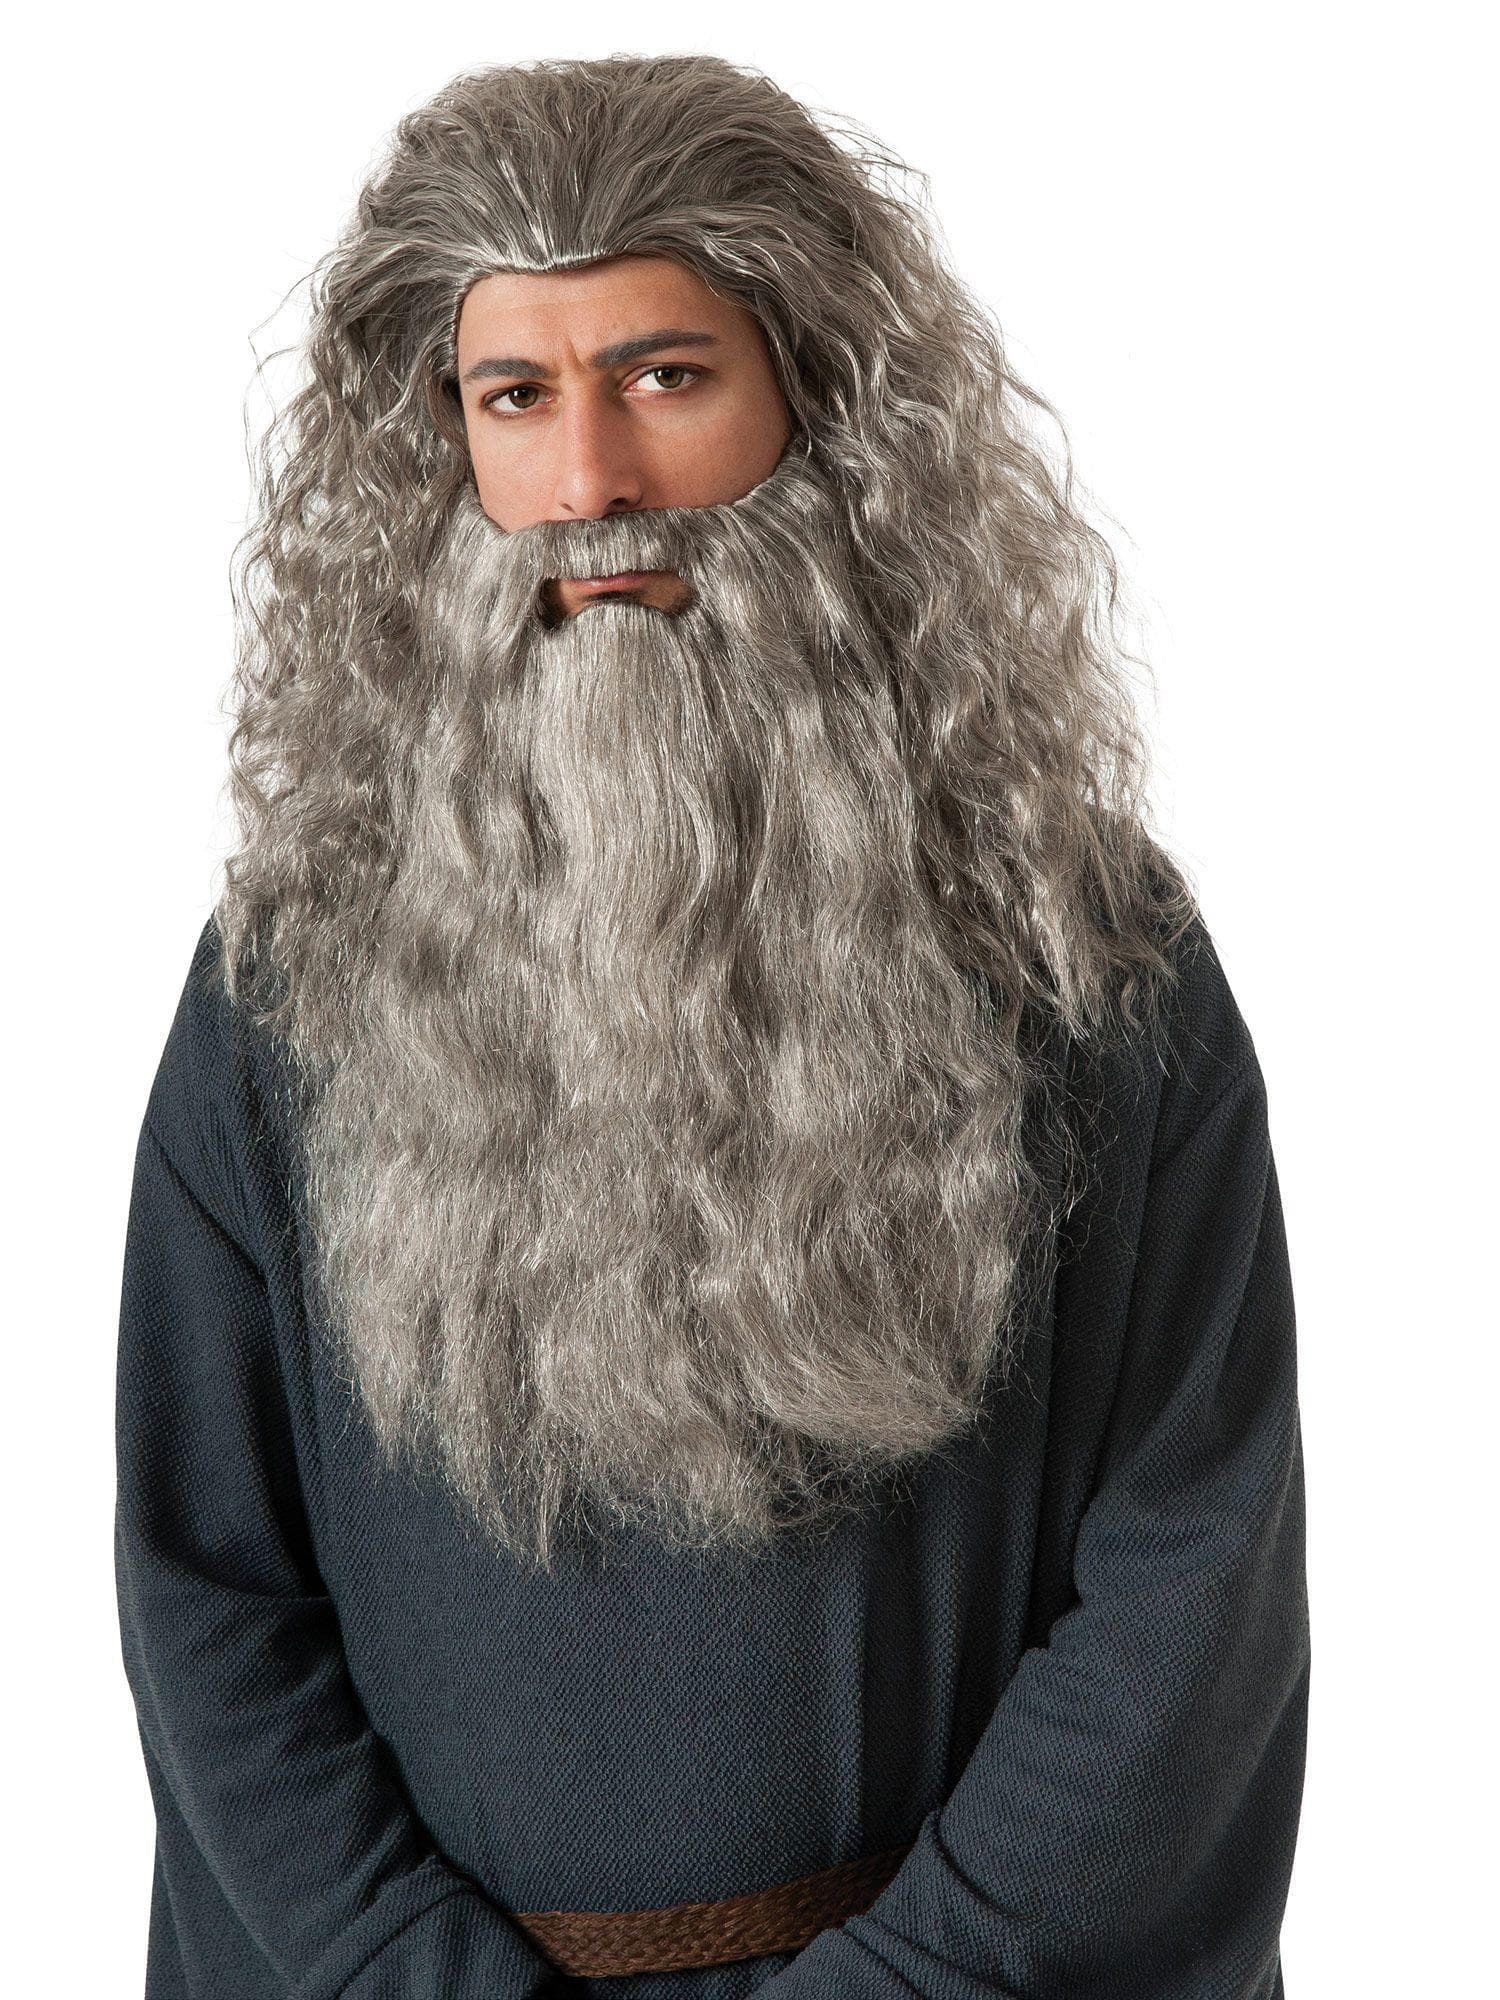 Adult The Lord of the Rings Gandalf Beard - costumes.com